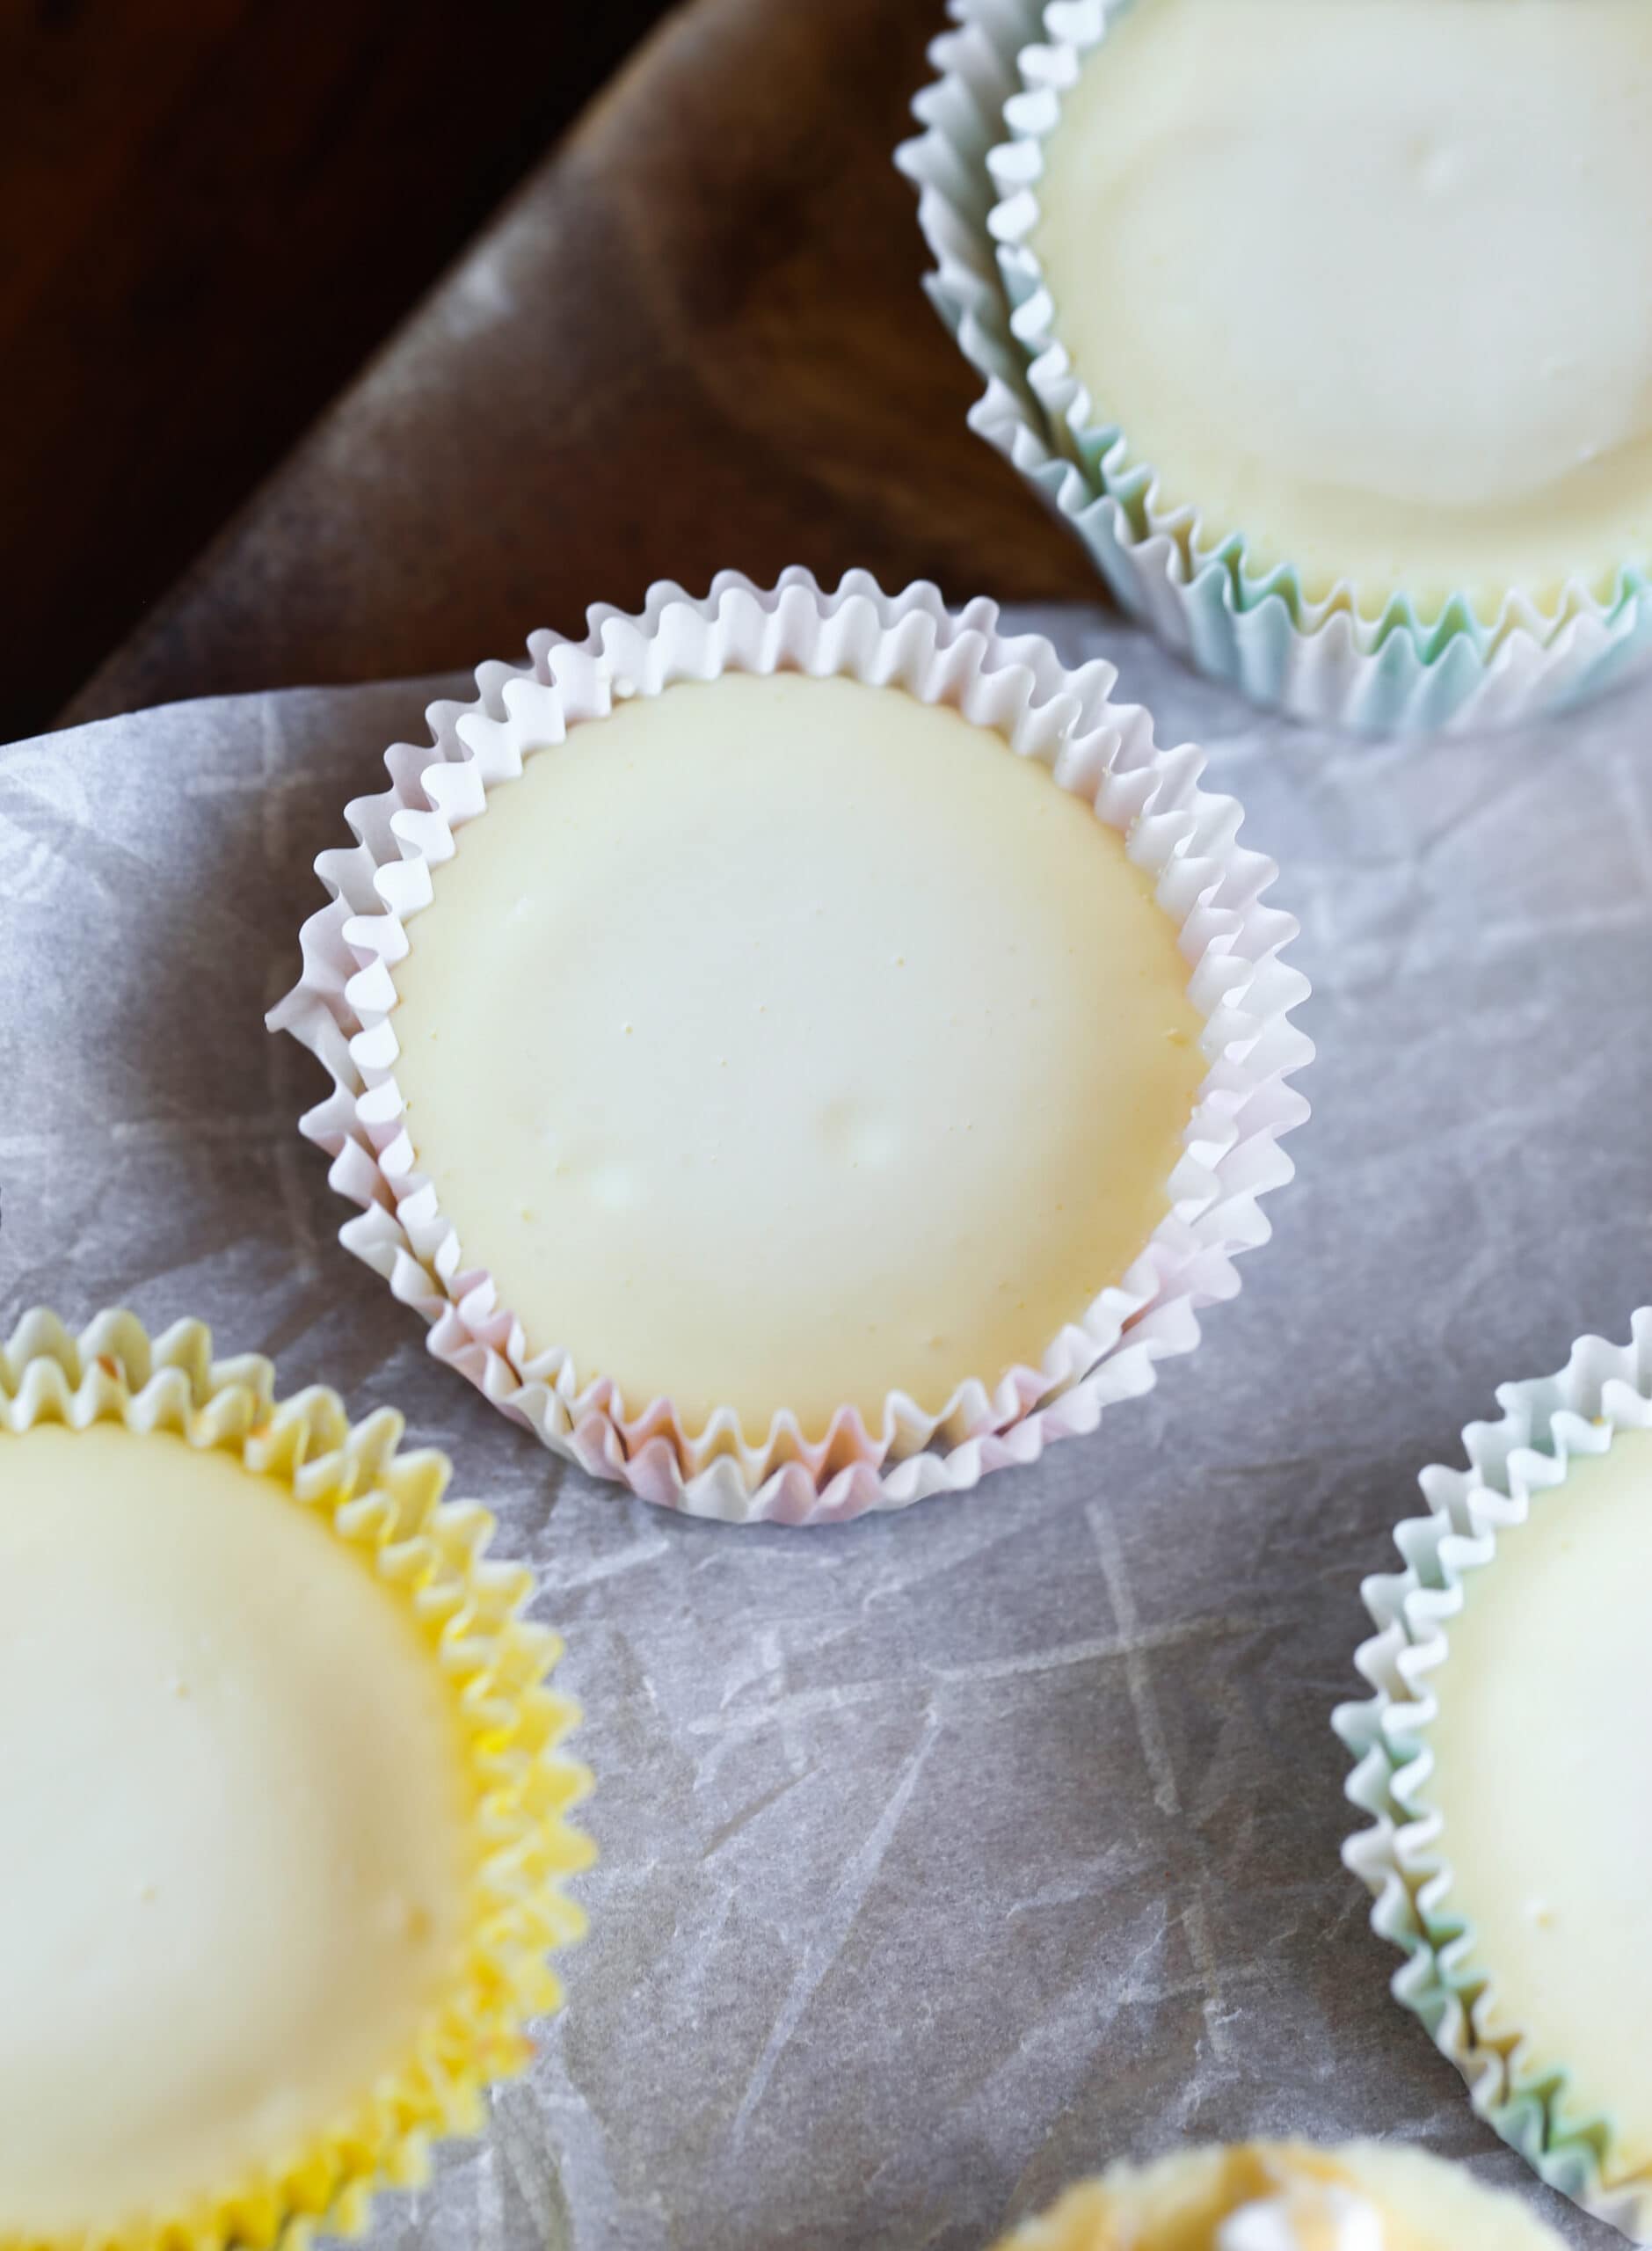 Cheesecake baked in a muffin tin with cupcake liners